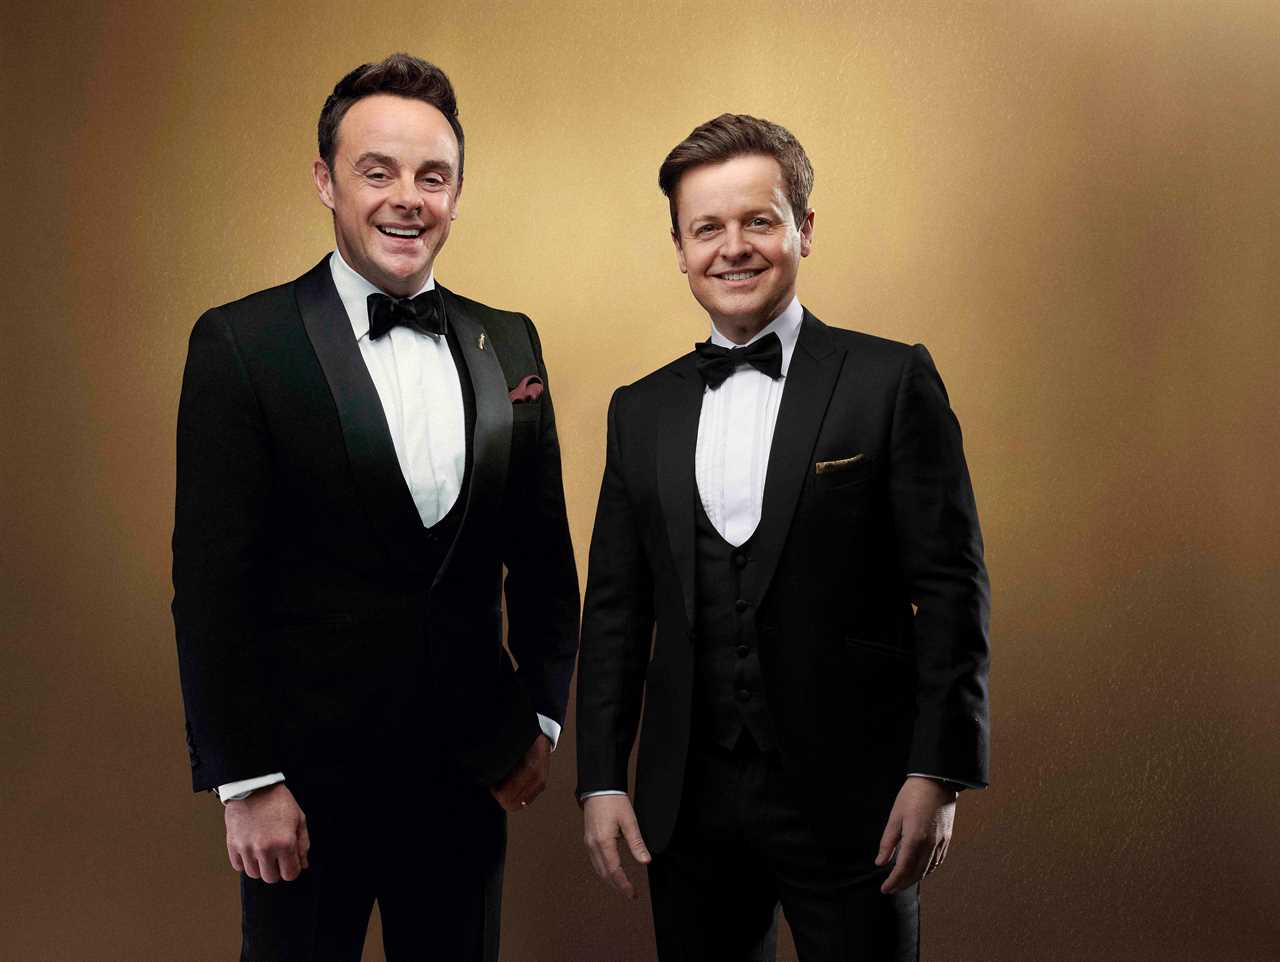 Britain’s Got Talent’s Ant and Dec aim savage dig at Simon Cowell after fans dub him ‘unrecognisable’